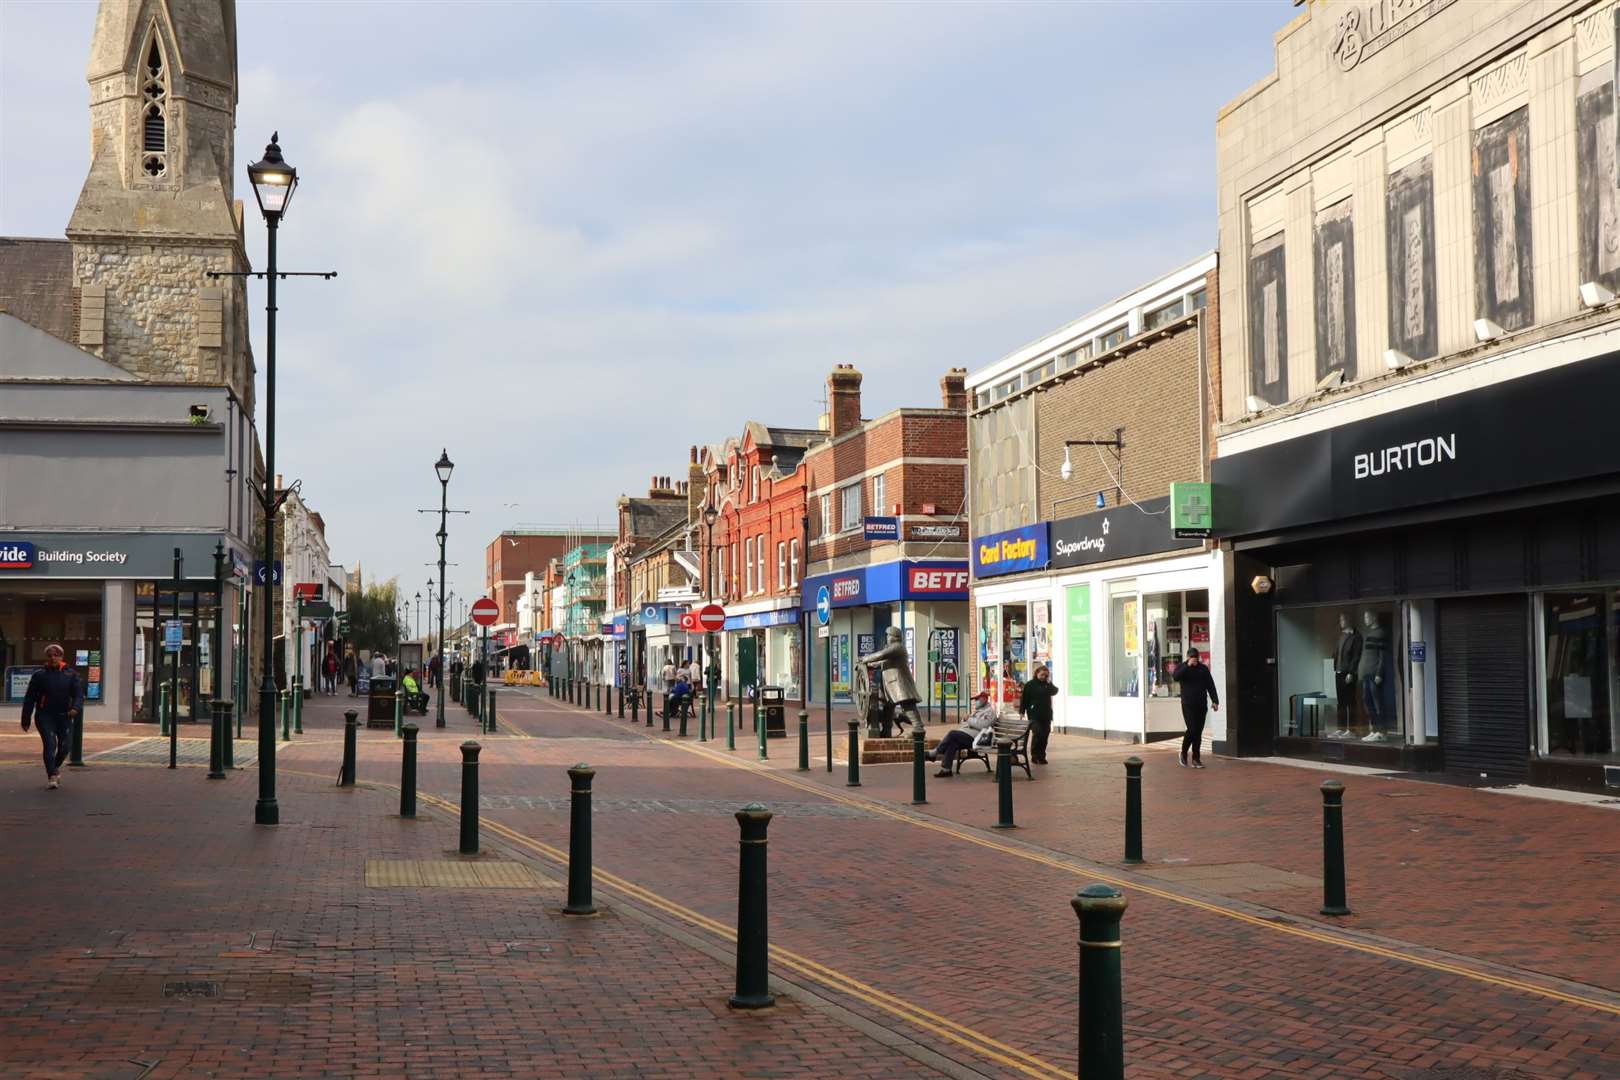 The robbery and assault took place at a shop in Sittingbourne High Street